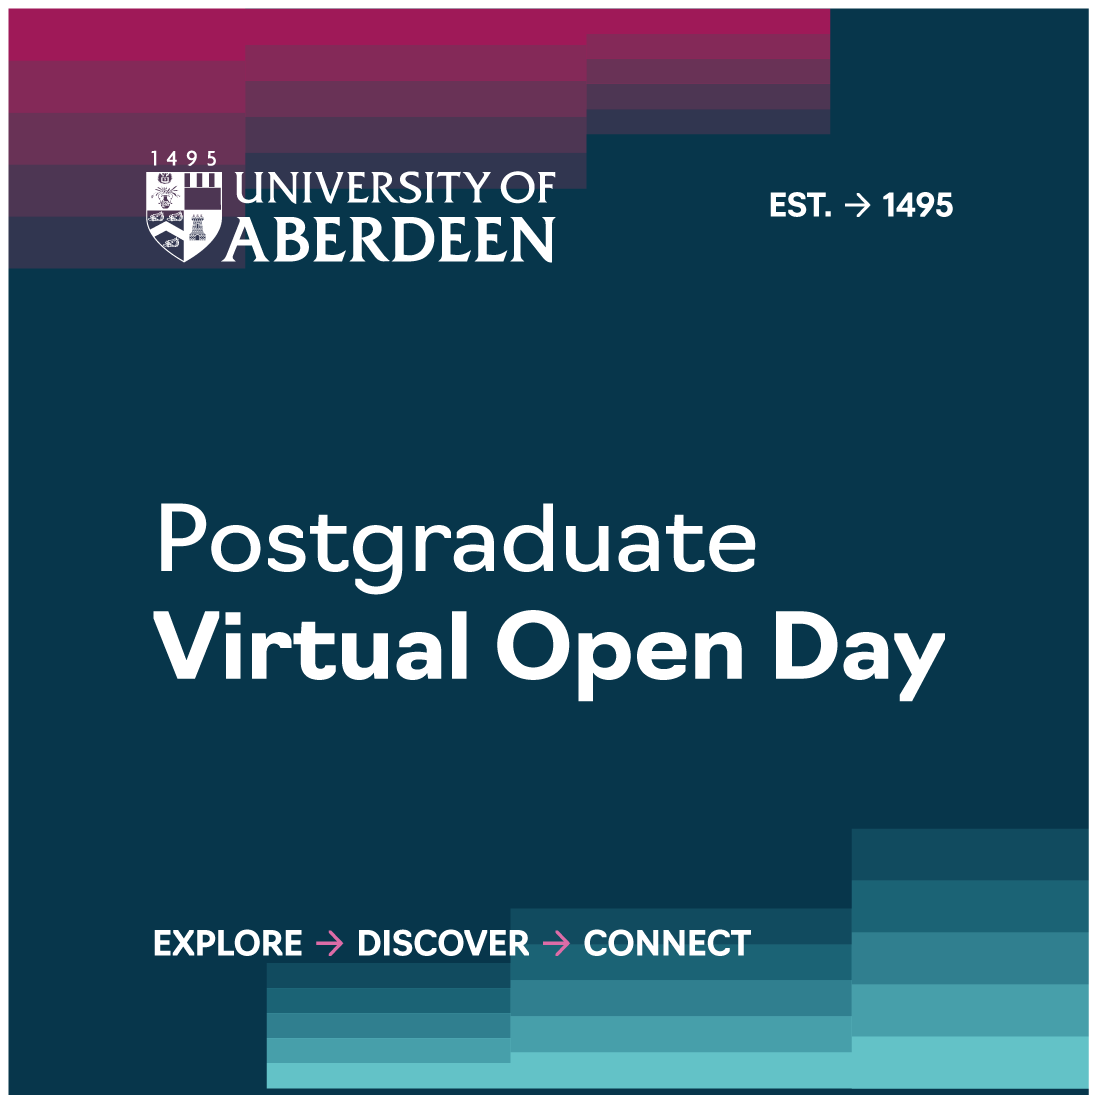 Our postgraduate students know no limits - breaking boundaries in a range of industries and professions. Sign up to learn more and speak with our experts and current students at our Postgraduate Virtual Open Day on Thursday 16 May -  abdn.io/C6